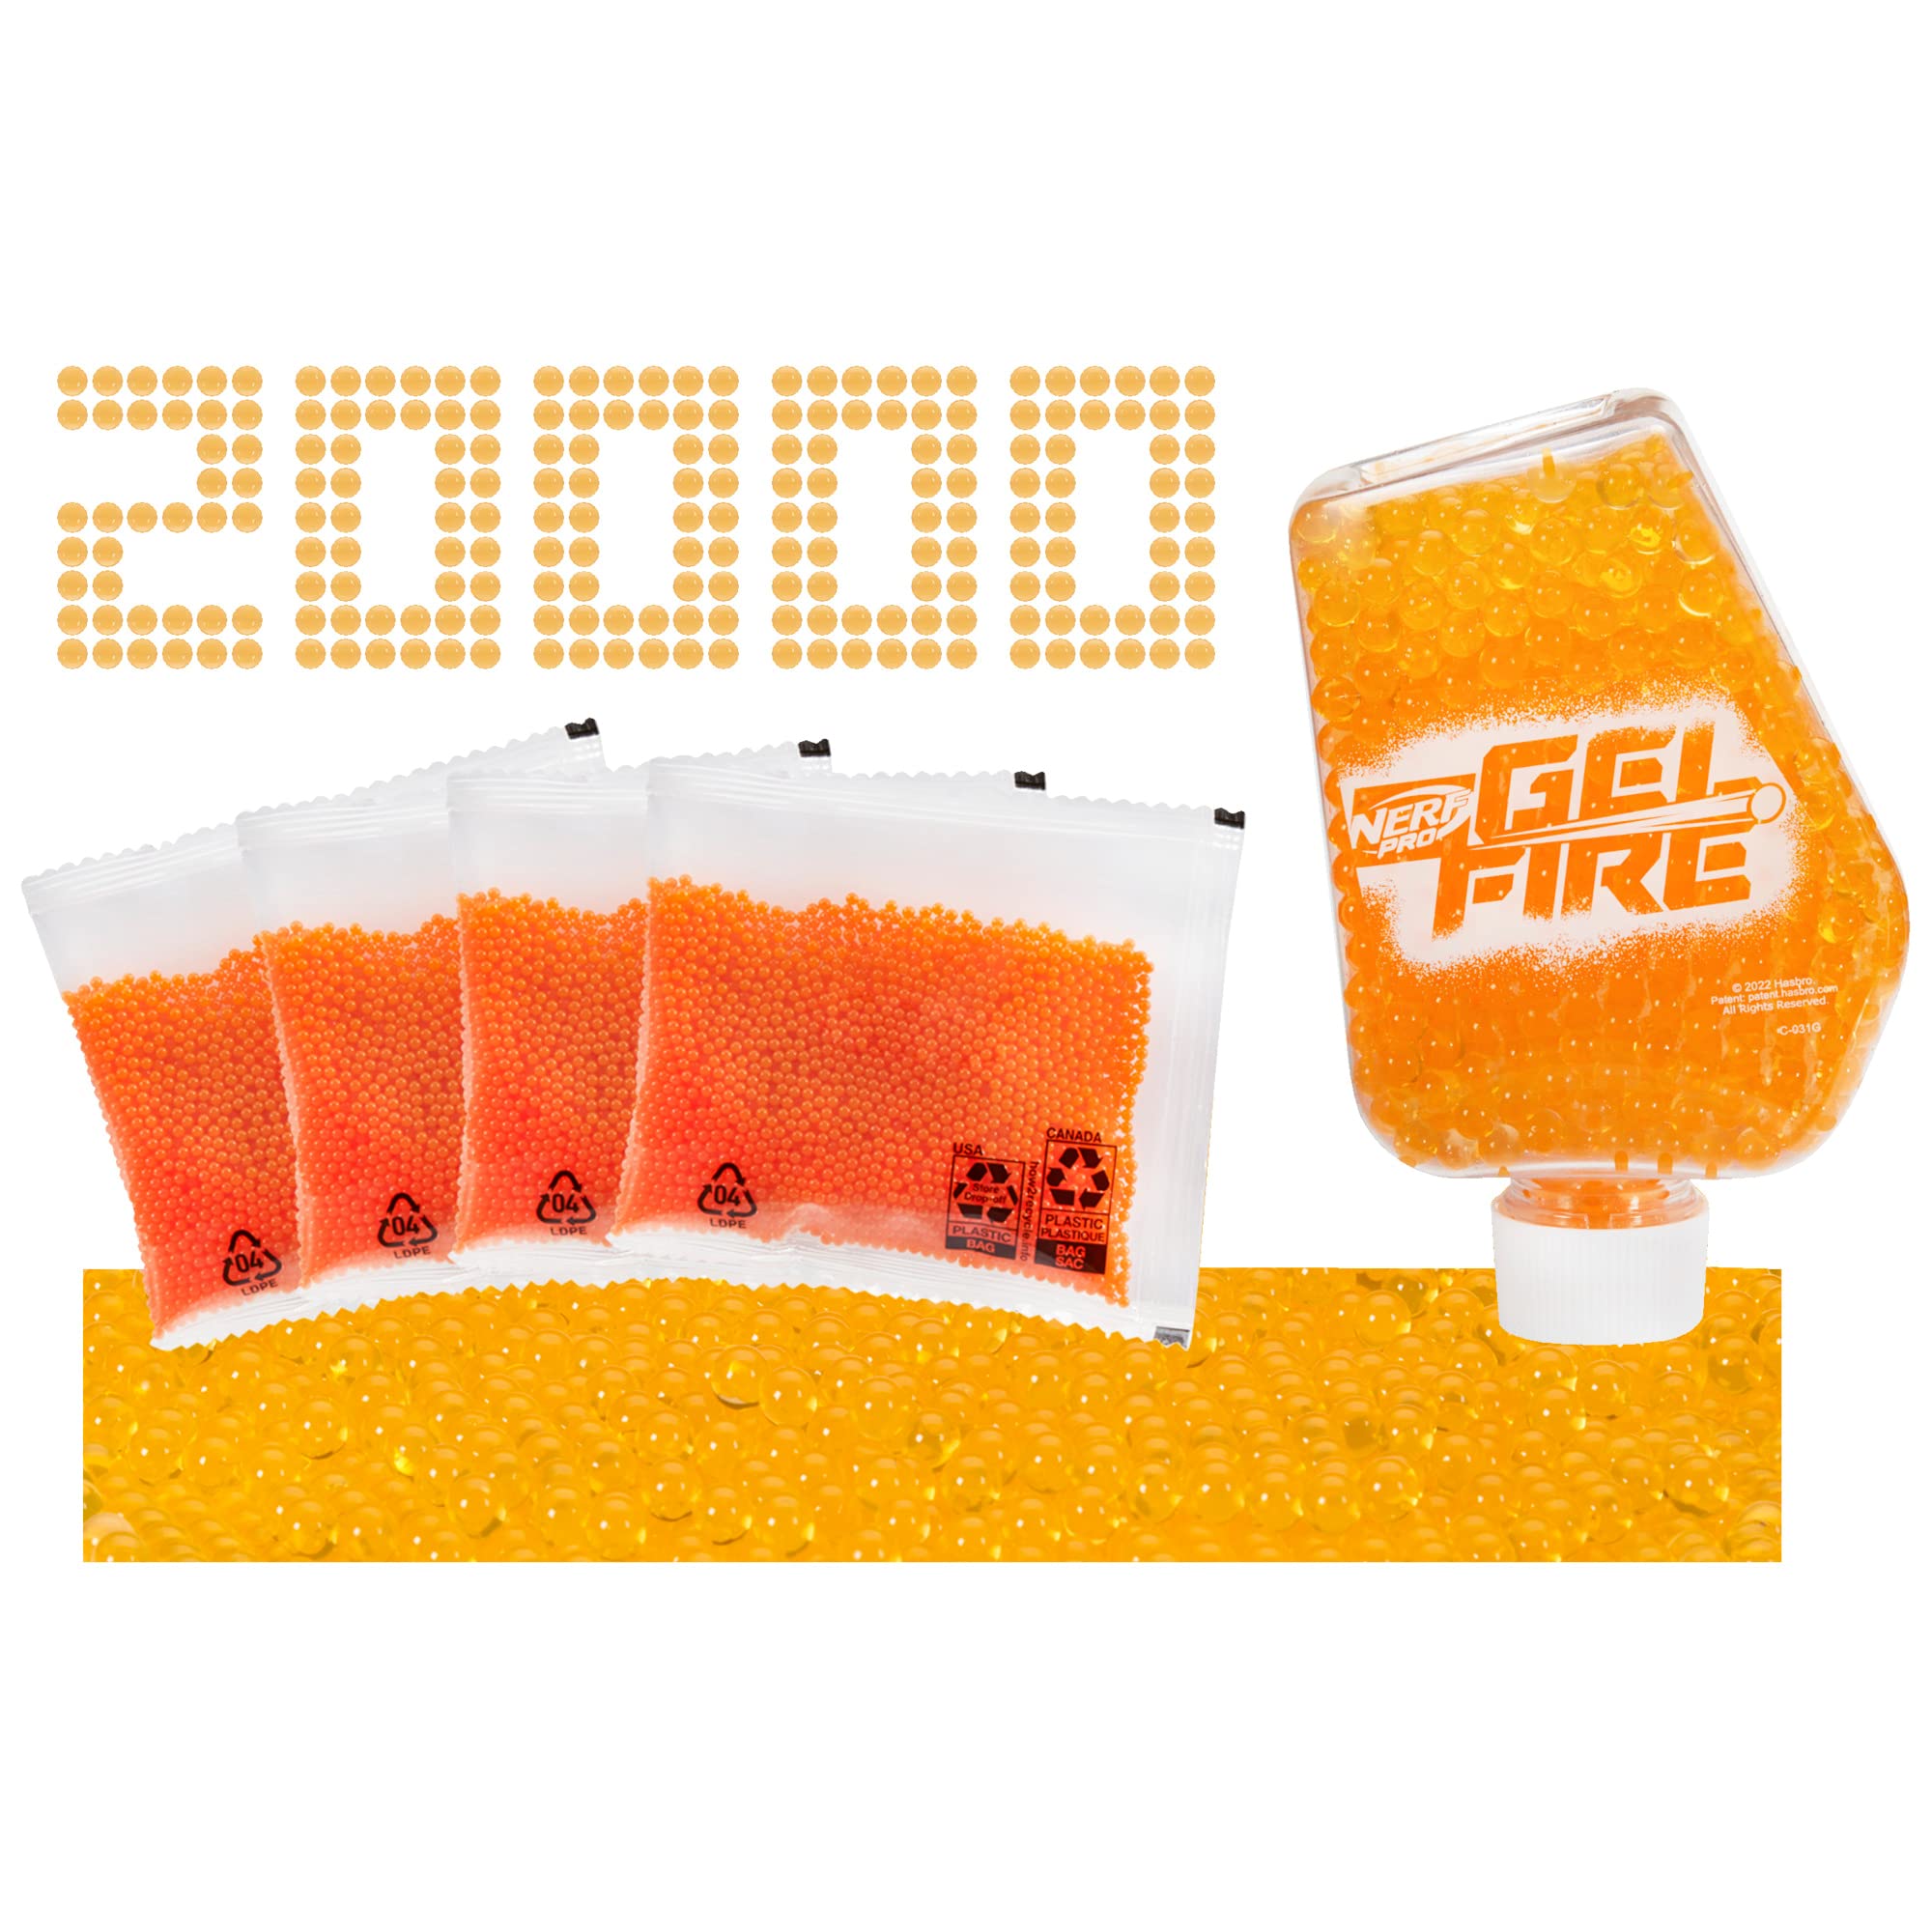 20,000-Round NERF Pro Gelfire Refill Dehydrated Rounds for Pro Gelfire Blasters $3.50 + Free Shipping w/ Prime or on $25+